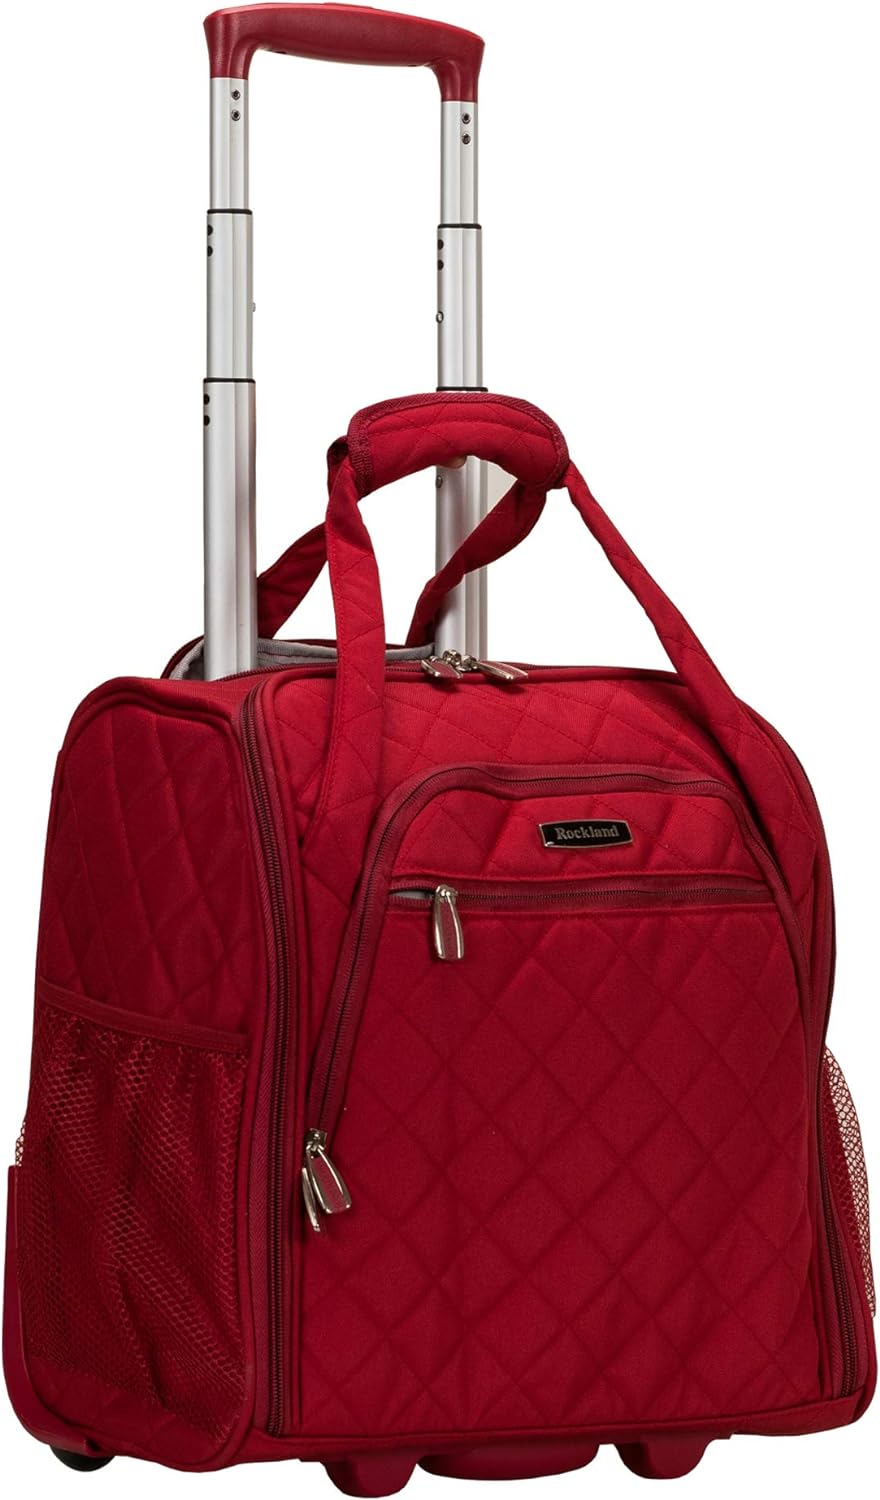 Rockland Melrose Upright Wheeled Underseater Luggage, Red, Carry-On 15-Inch 